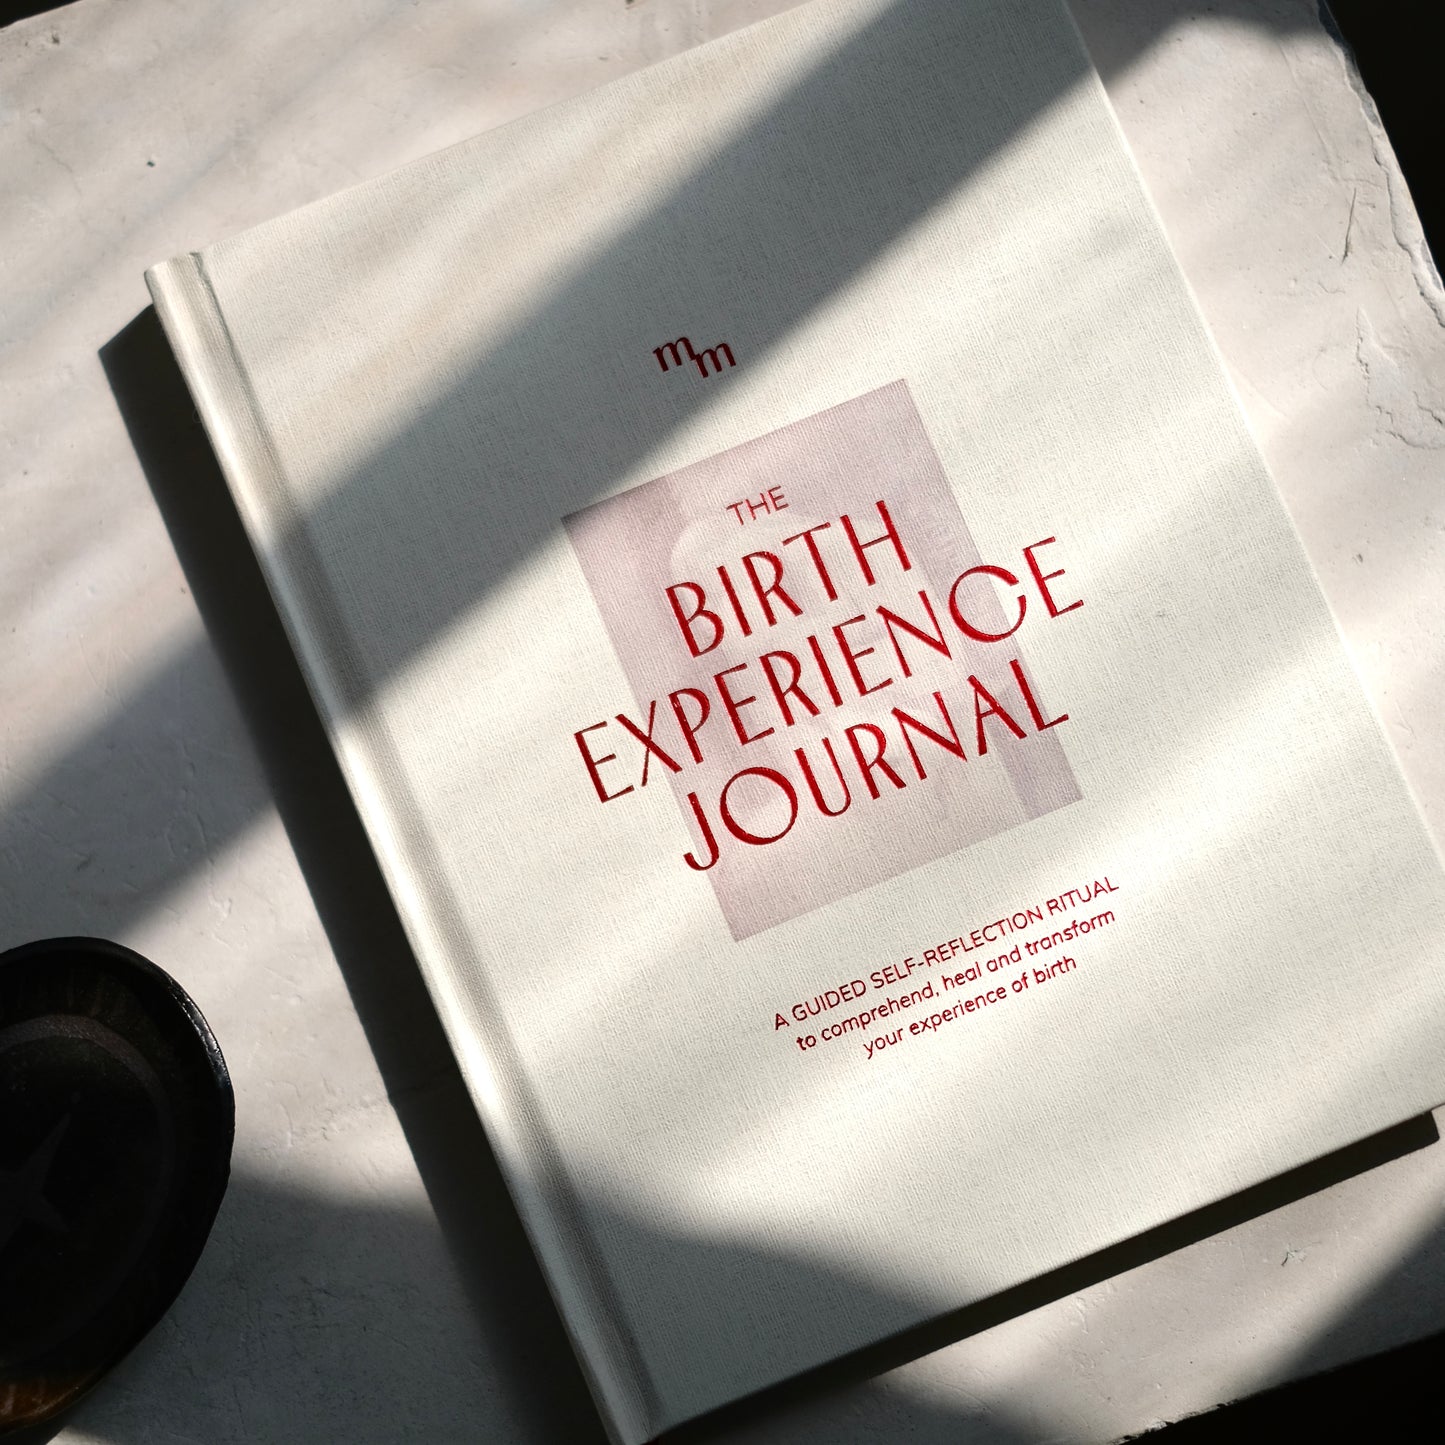 The Birth Experience Journal - A Guided Inner Journey For Postpartum & Beyond